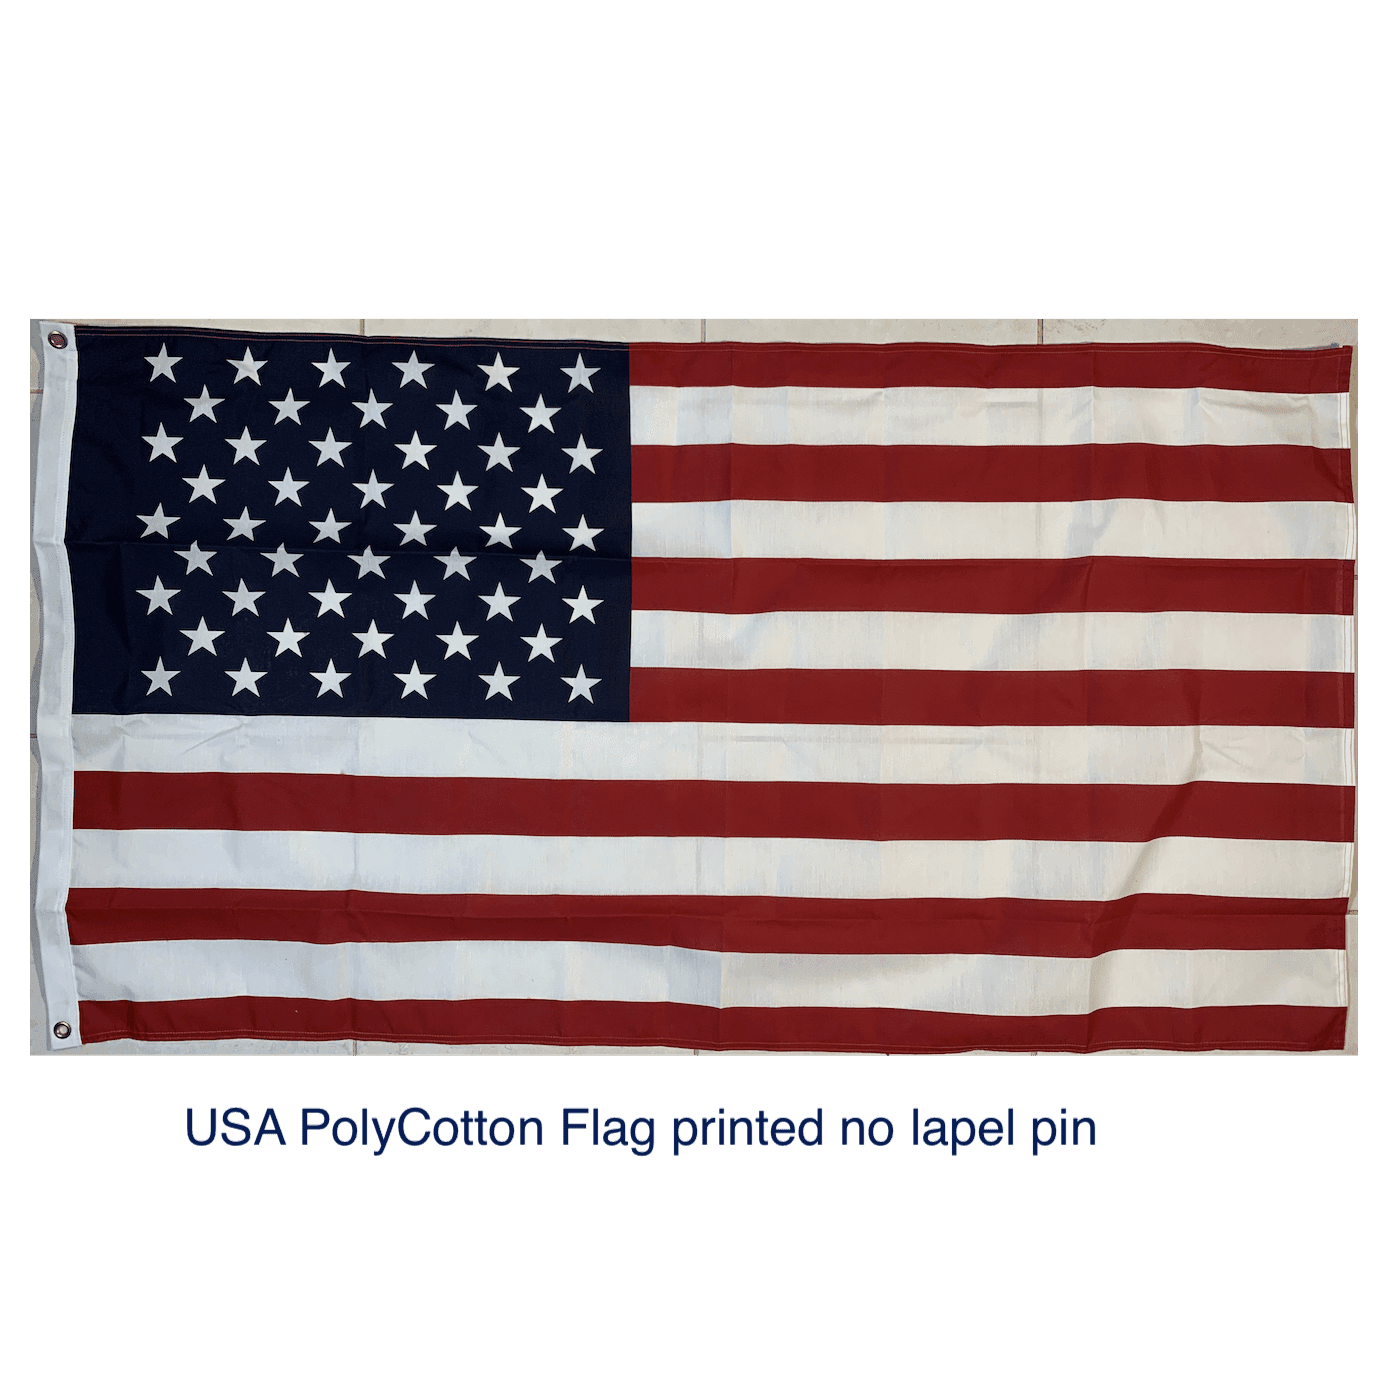 Free shipping to USA on orders over $69. American Flag - Best Value.  Brilliant Economical USA Flag Made in the USA created with grommets. Our  best buy in USA Made American Flags.